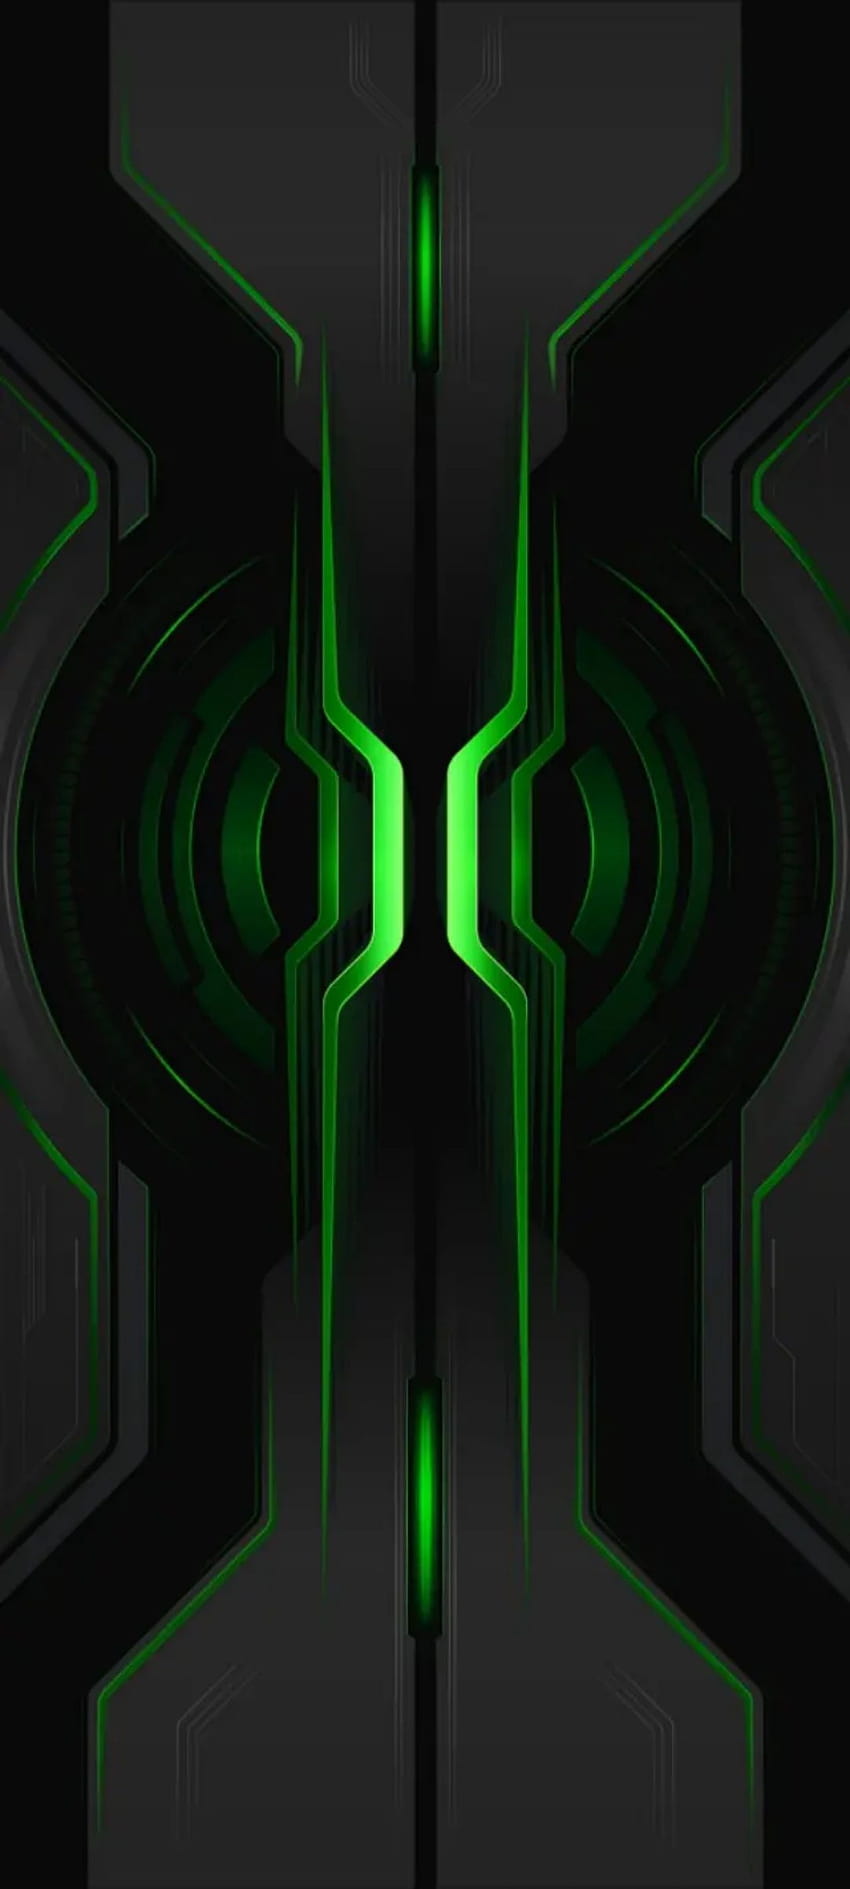 Green Gaming posted by Ryan Sellers, aesthetic green gaming HD phone wallpaper